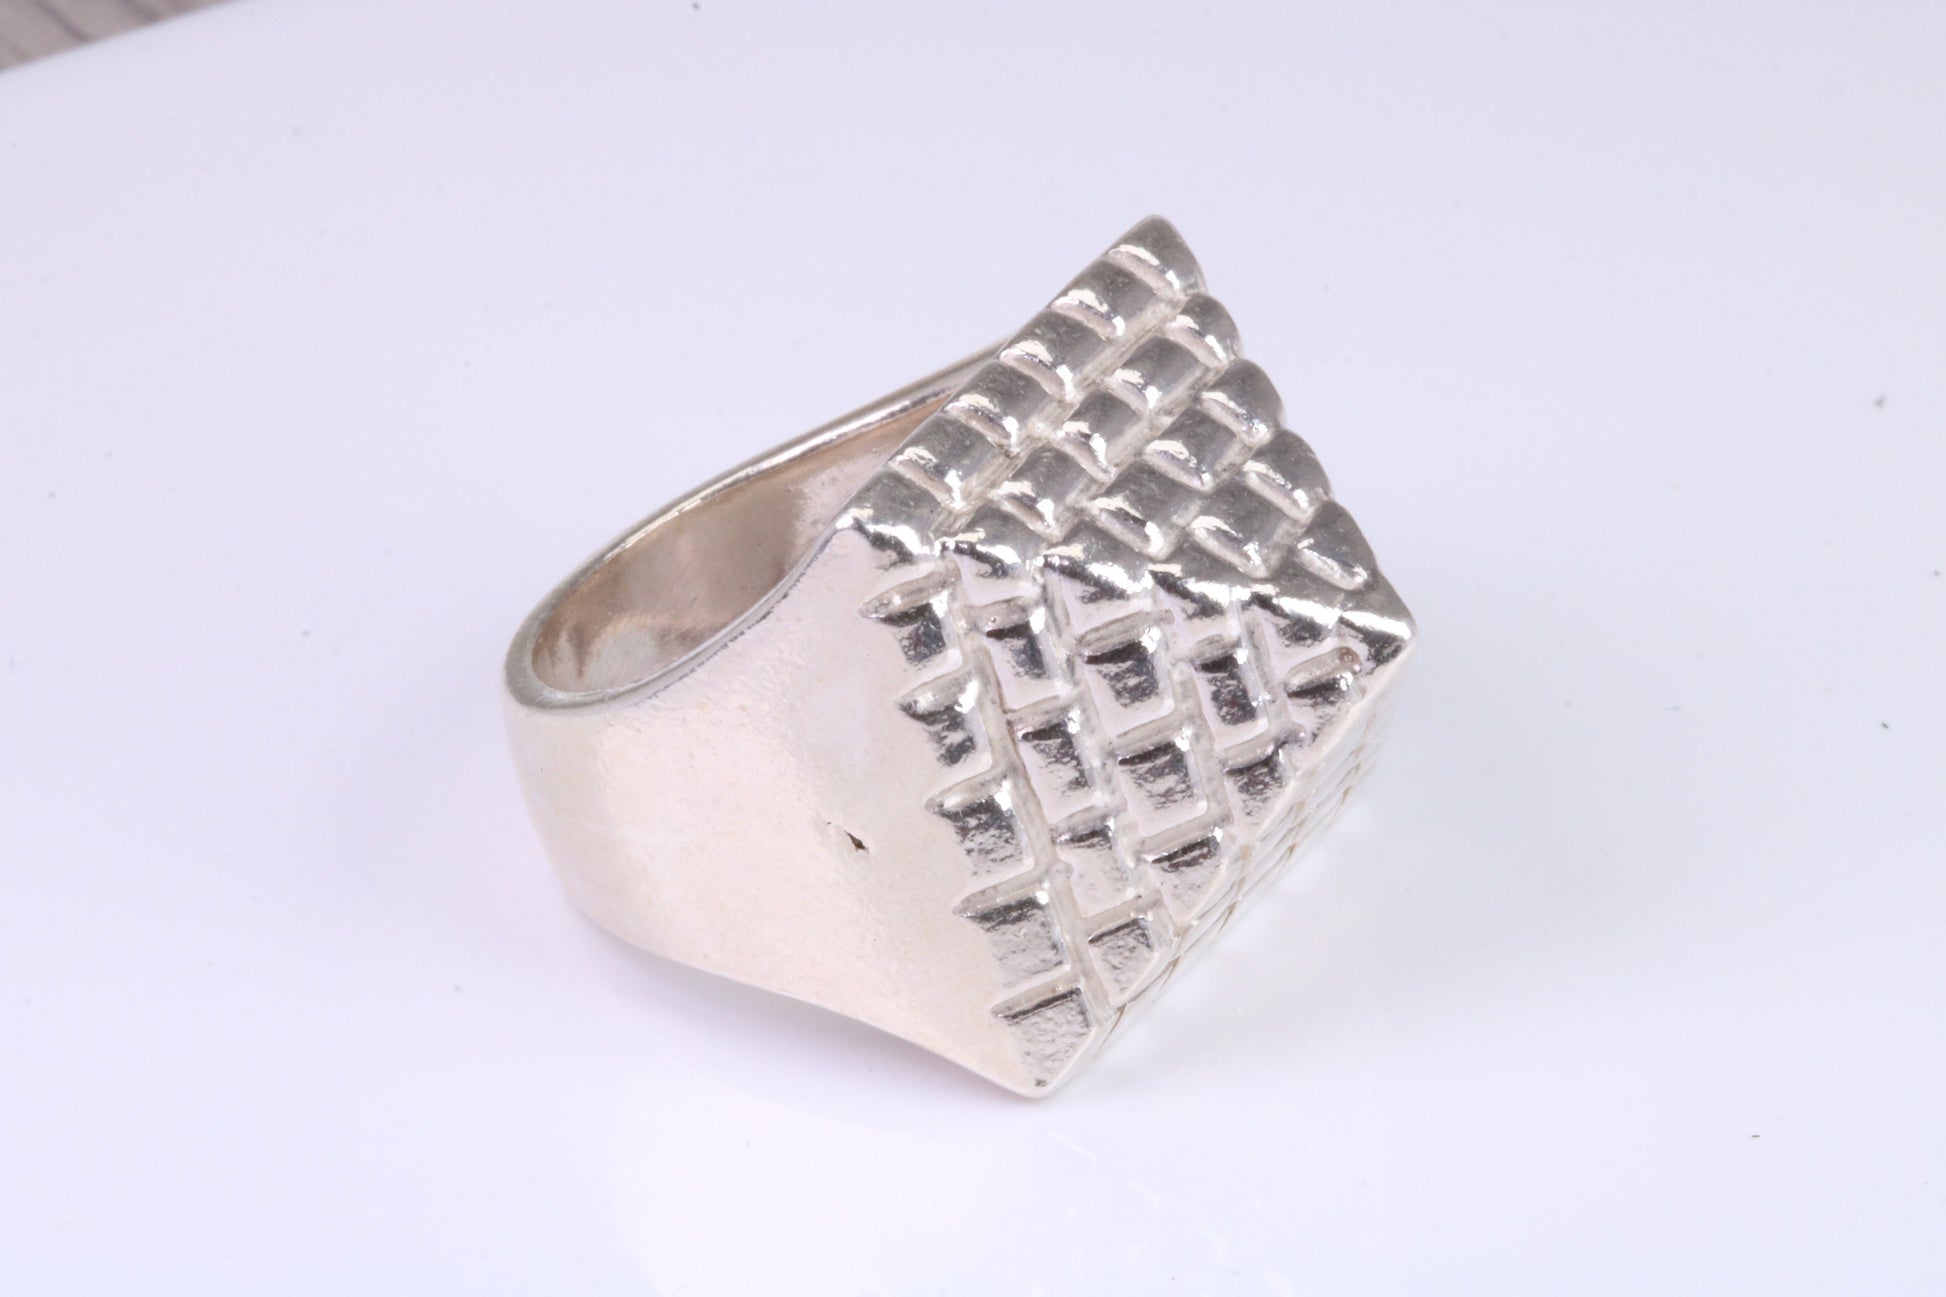 Very large and very heavy Pyramid ring,solid silver, perfect for ladies and gents. Available in silver, yellow gold, white gold and platinum